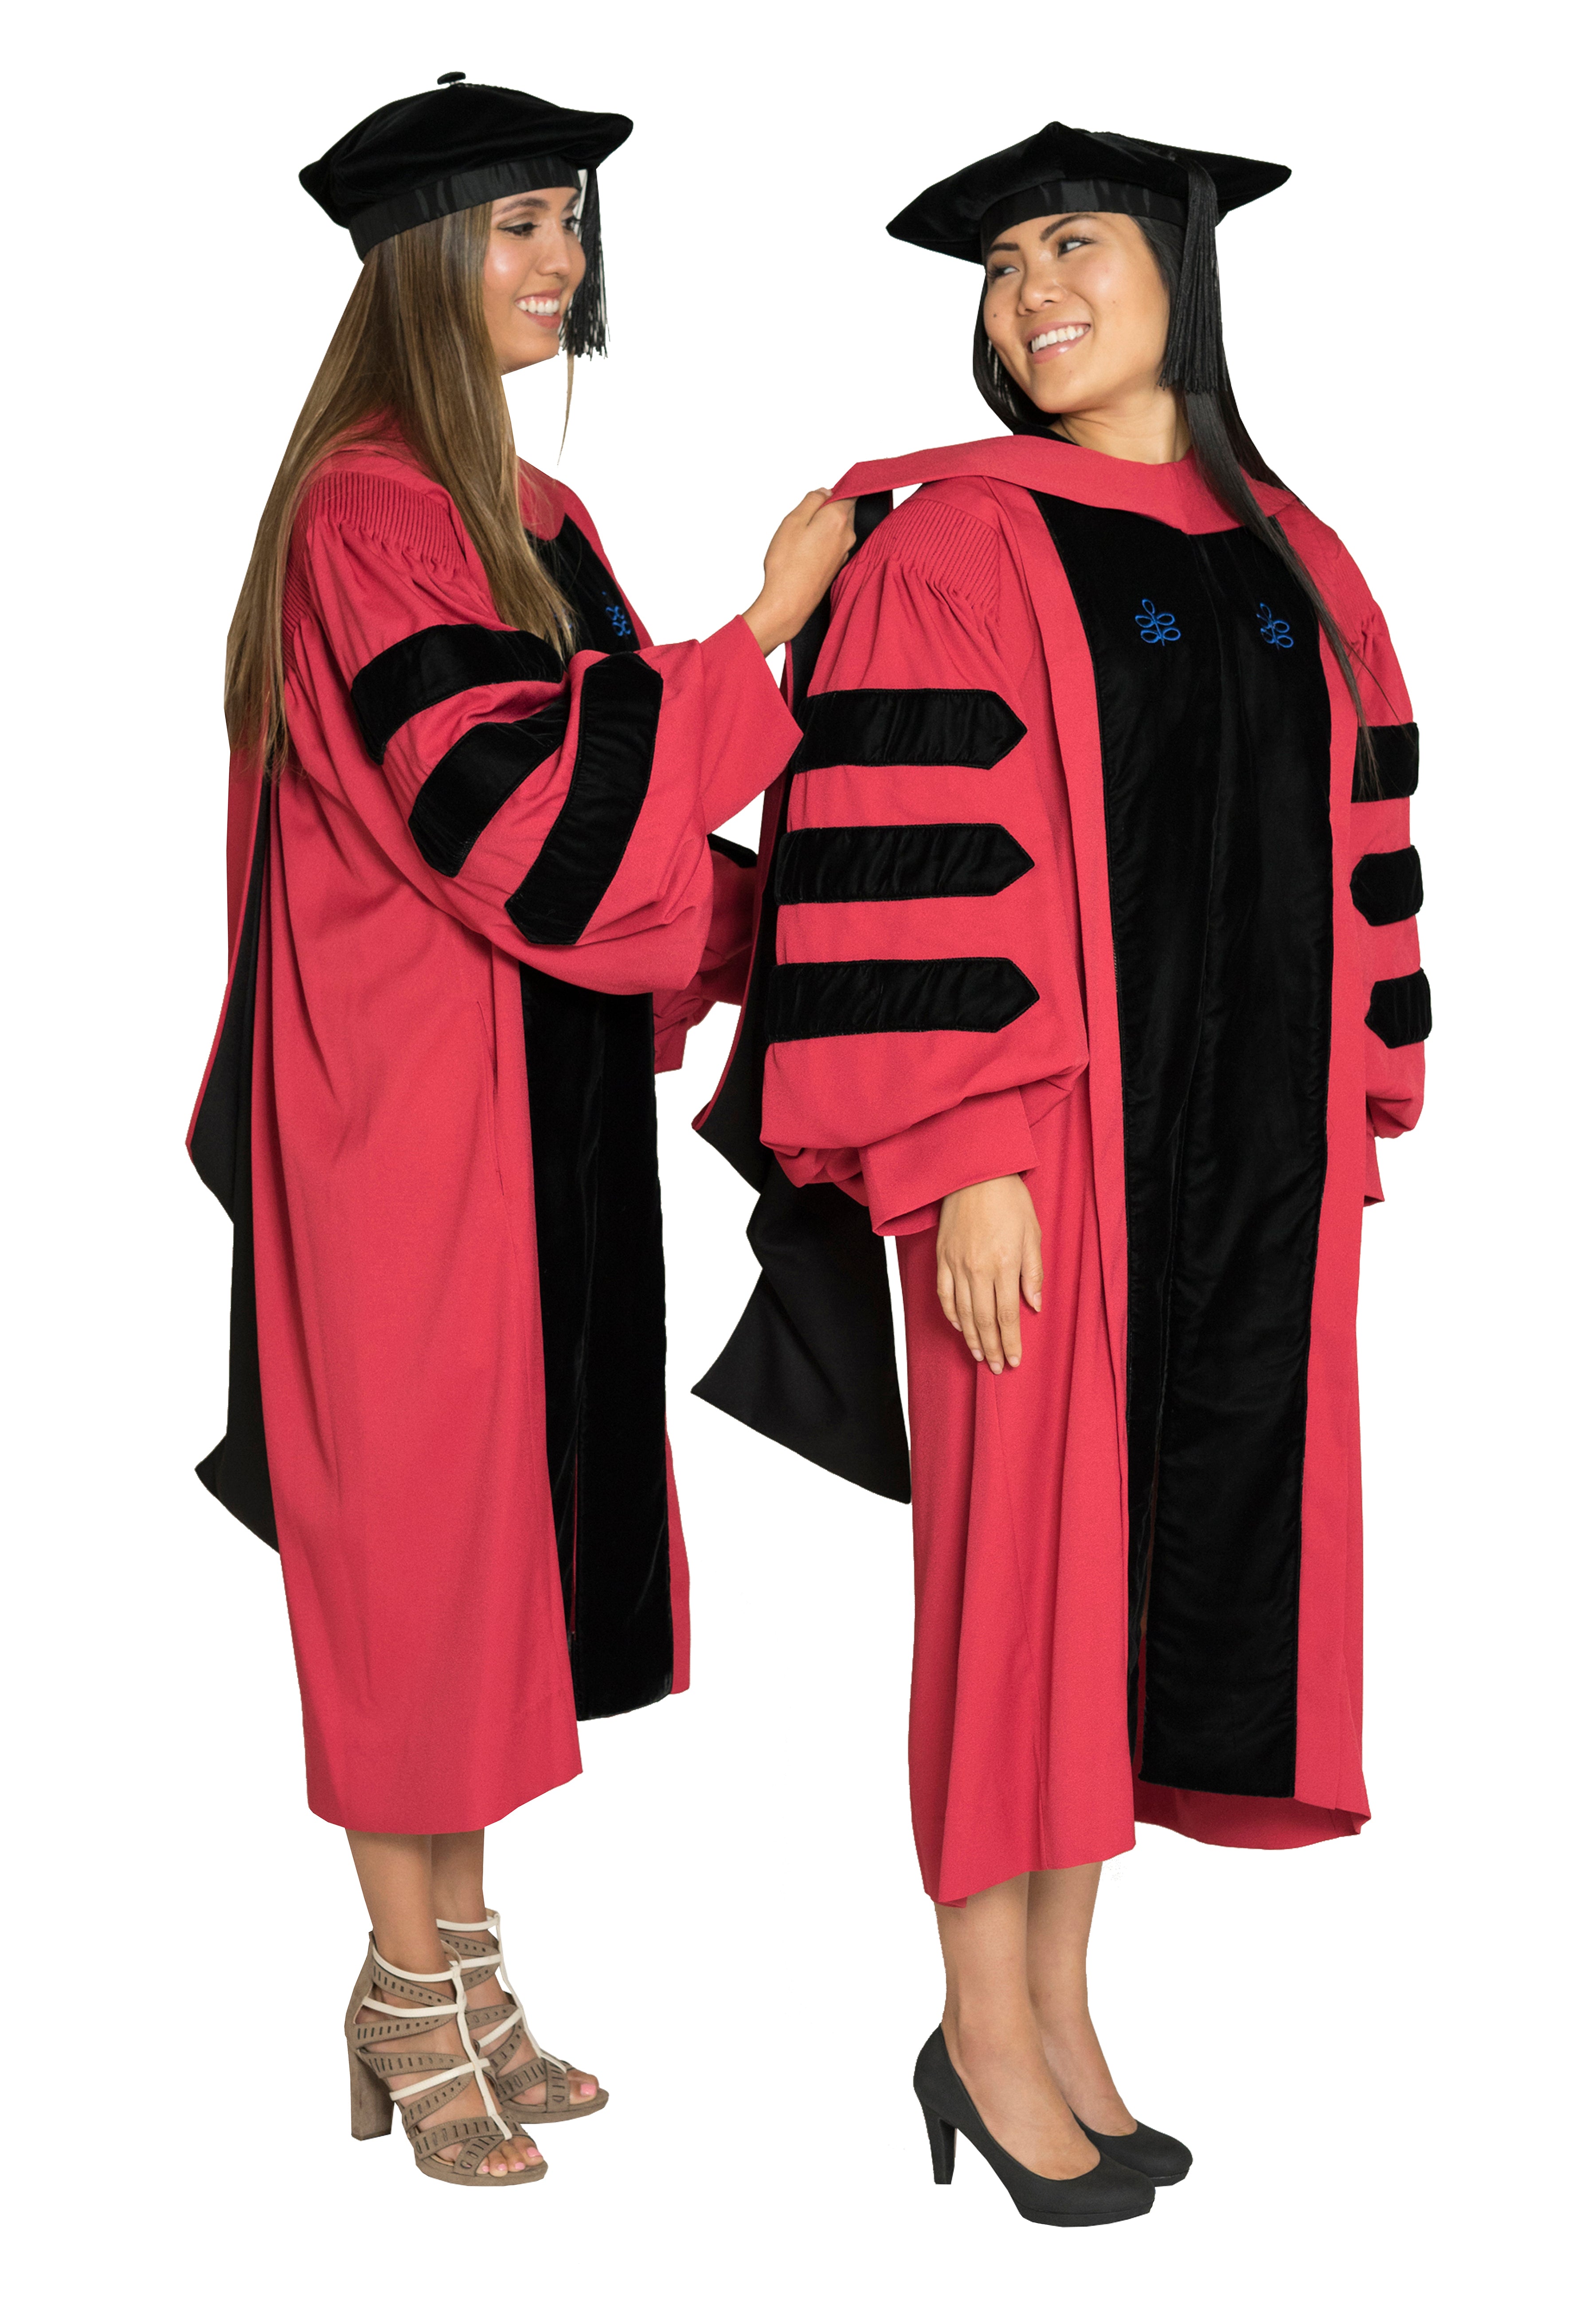 How To Wear Your Academic Hood